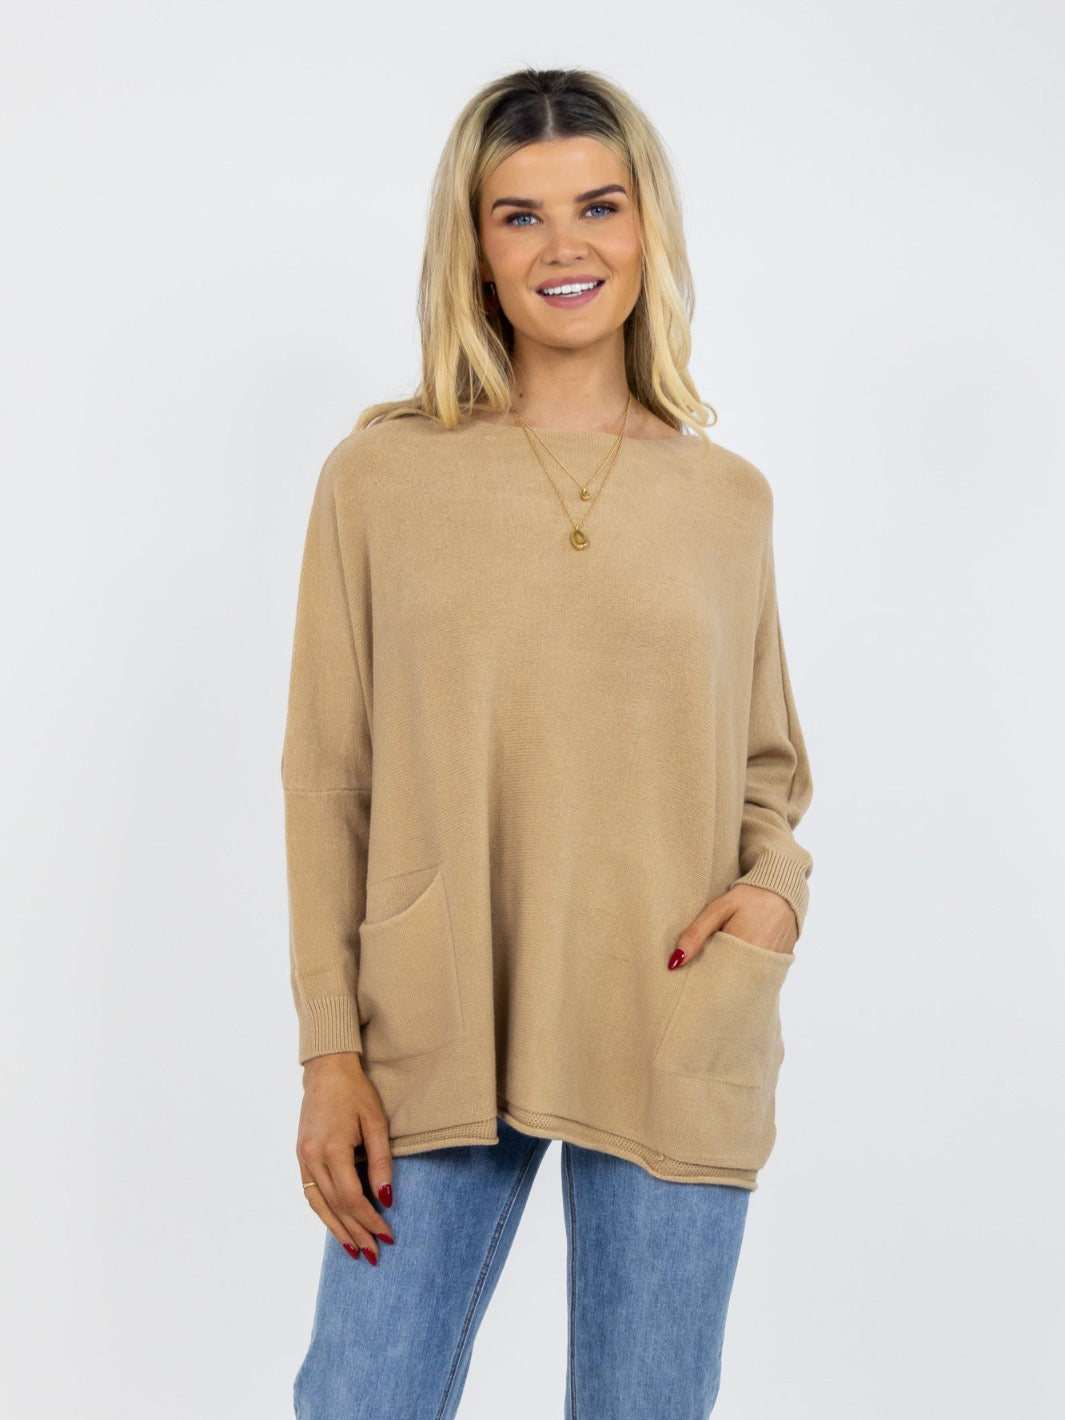 Kate & Pippa Roma Knit Jumper In Biscuit-Kate & Pippa